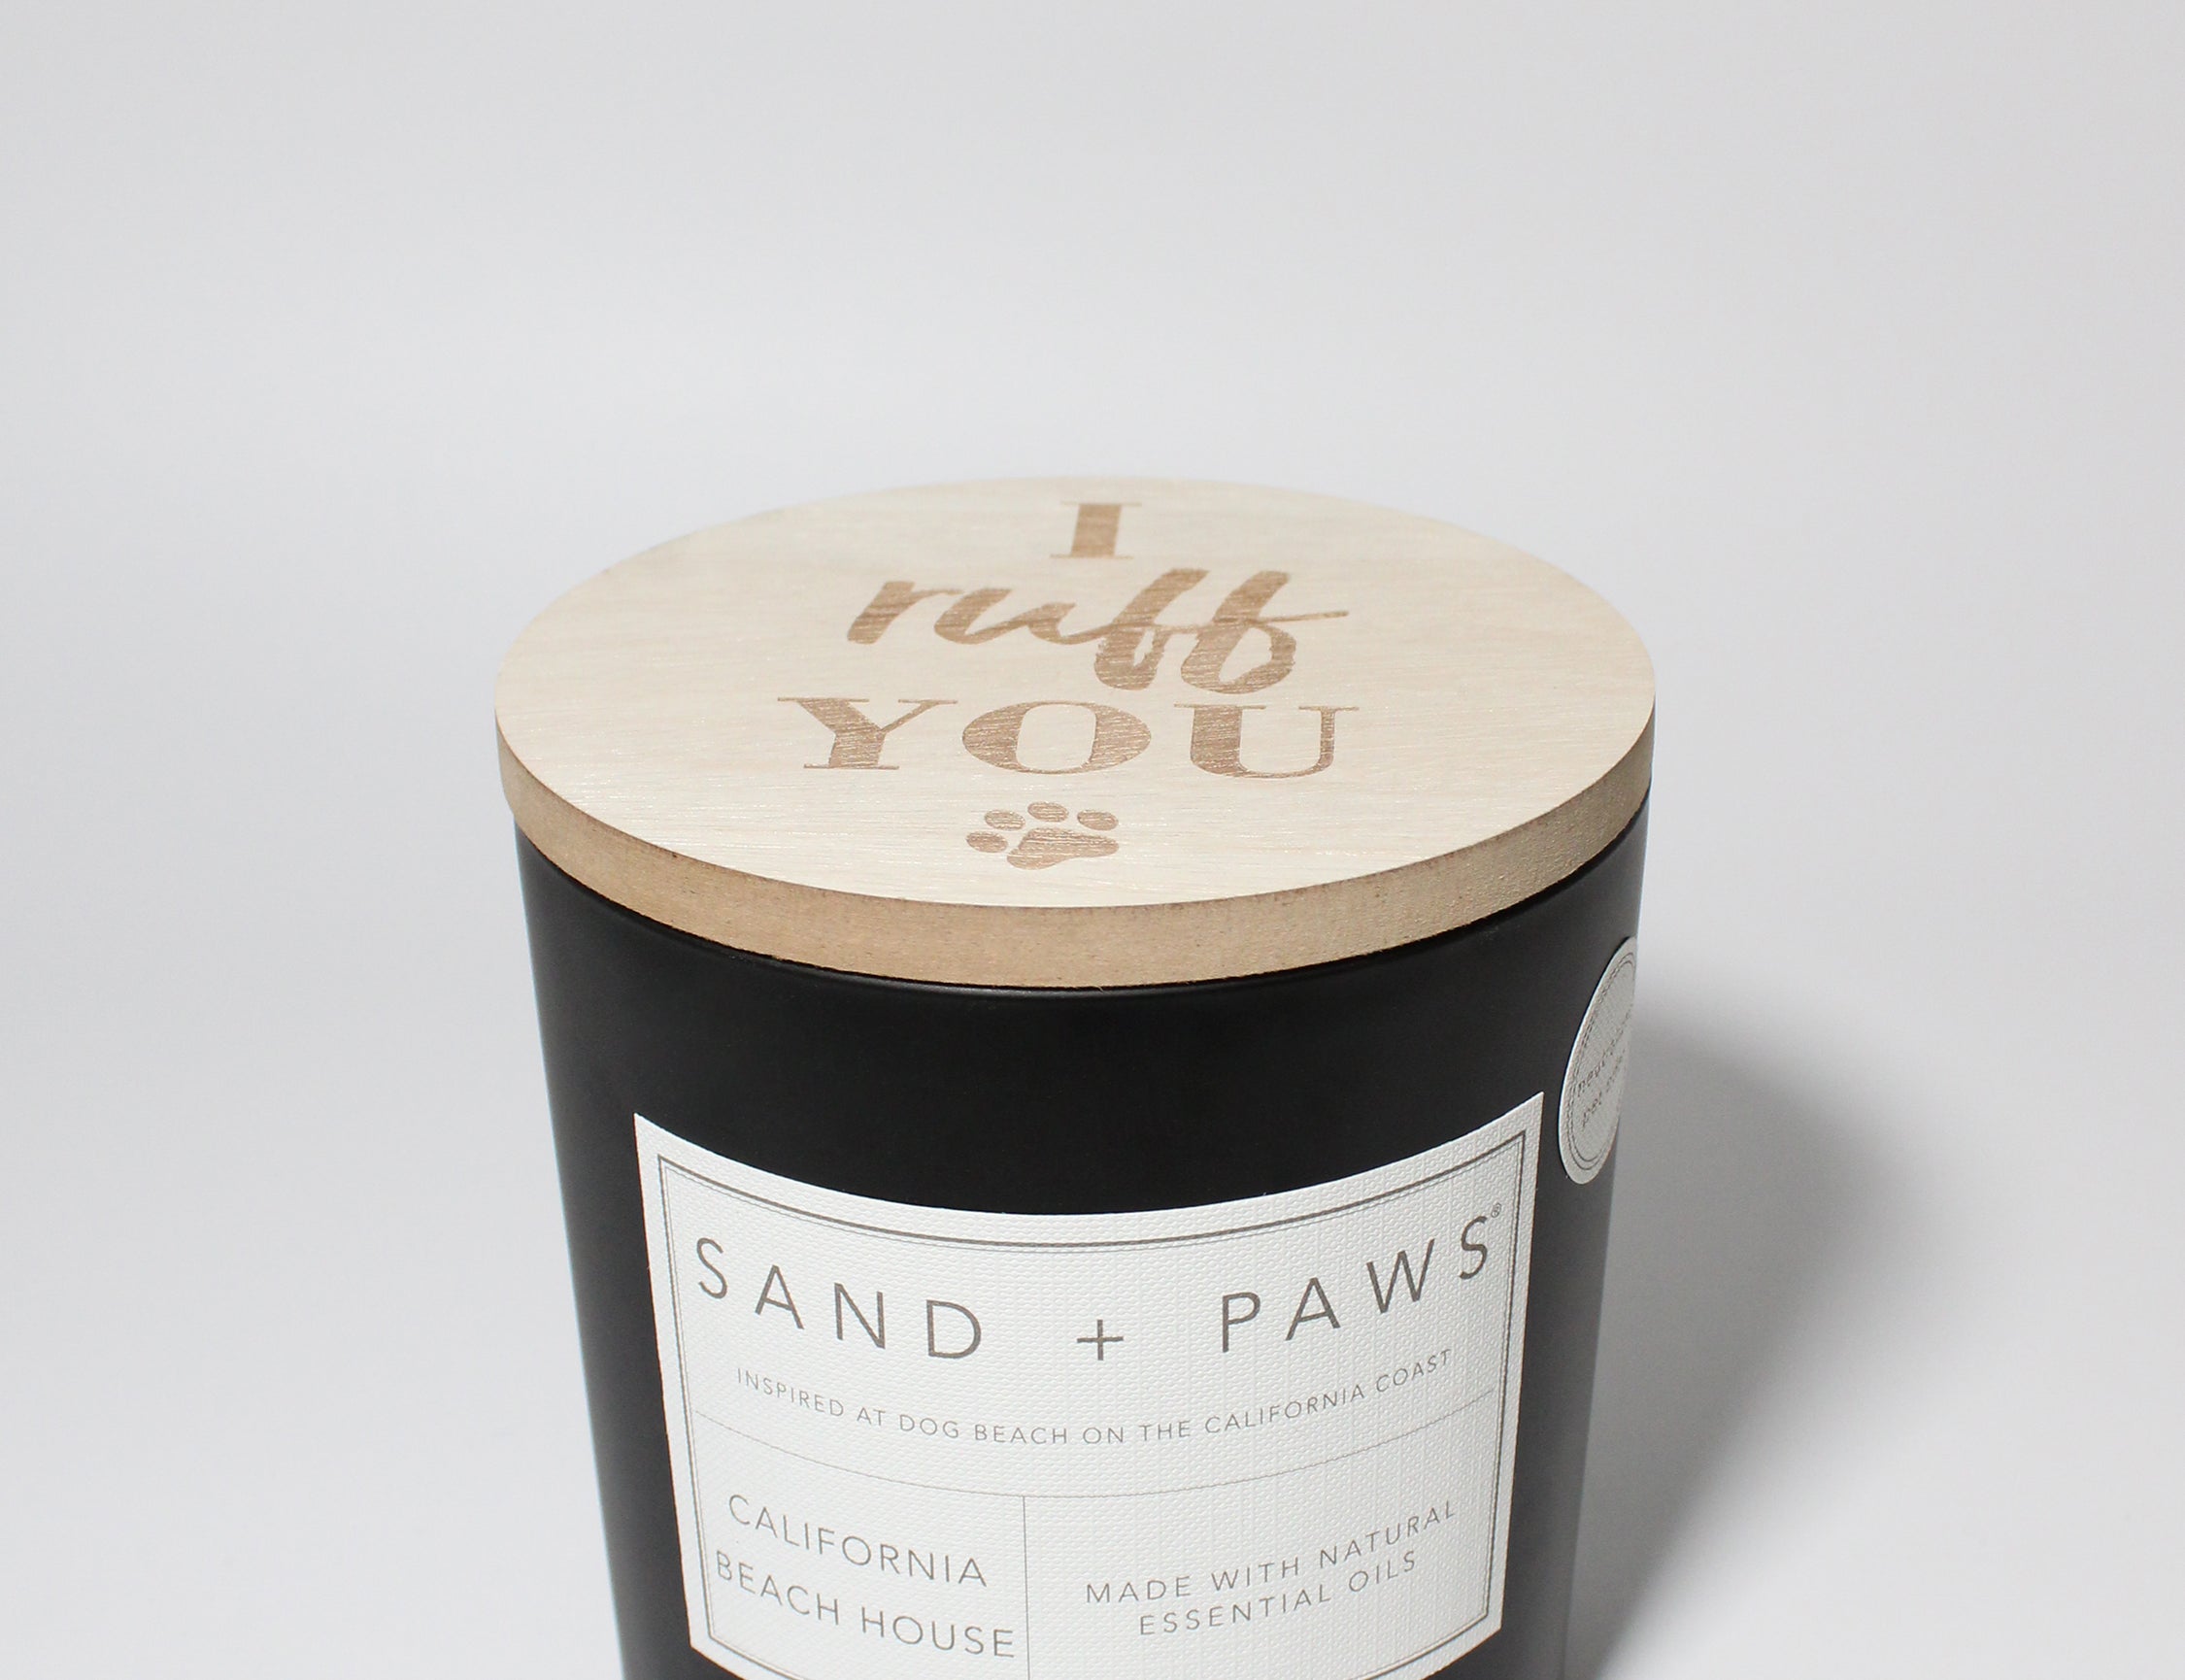 Sand + Paws California Beach House 21 oz scented candle Black vessel with Carved "I ruff you"